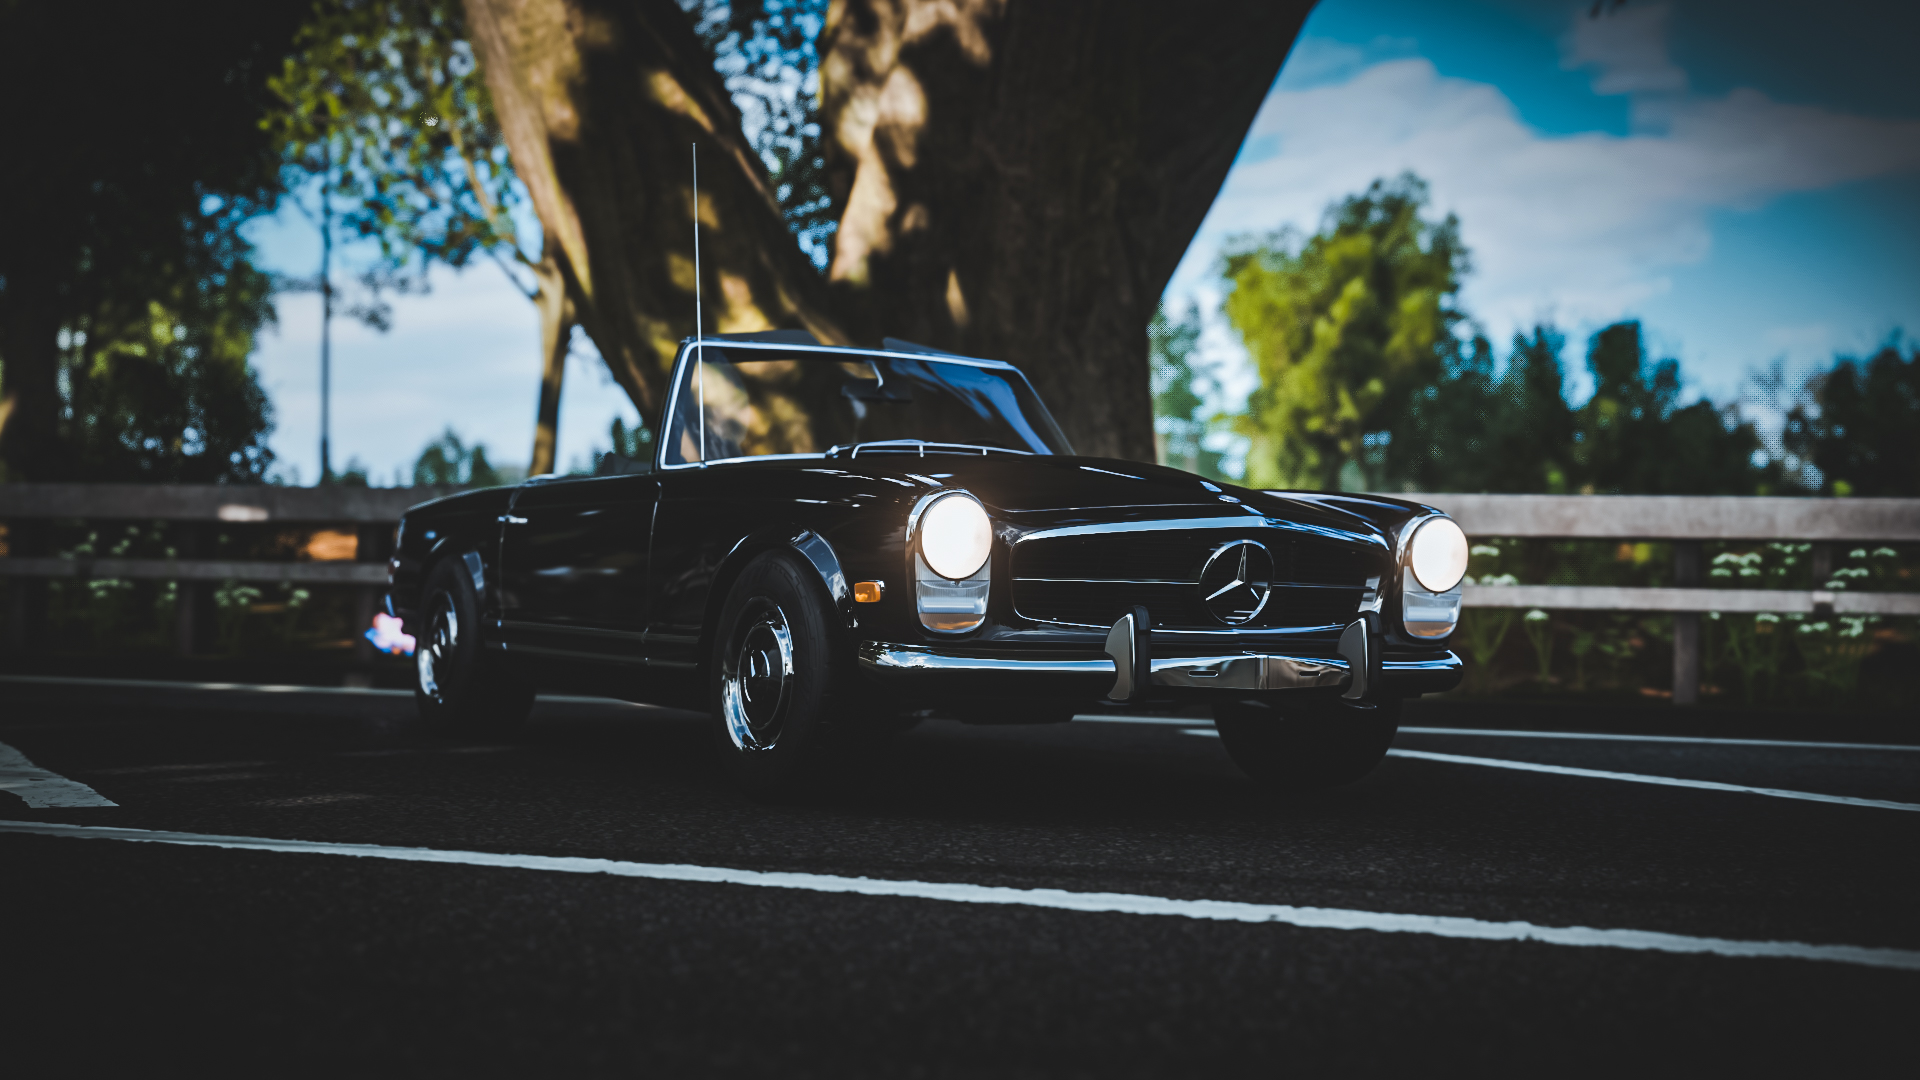 General 1920x1080 Mercedes 280sl Mercedes-Benz car Forza Forza Horizon 4 vehicle oldtimers old car convertible German cars video games PlaygroundGames